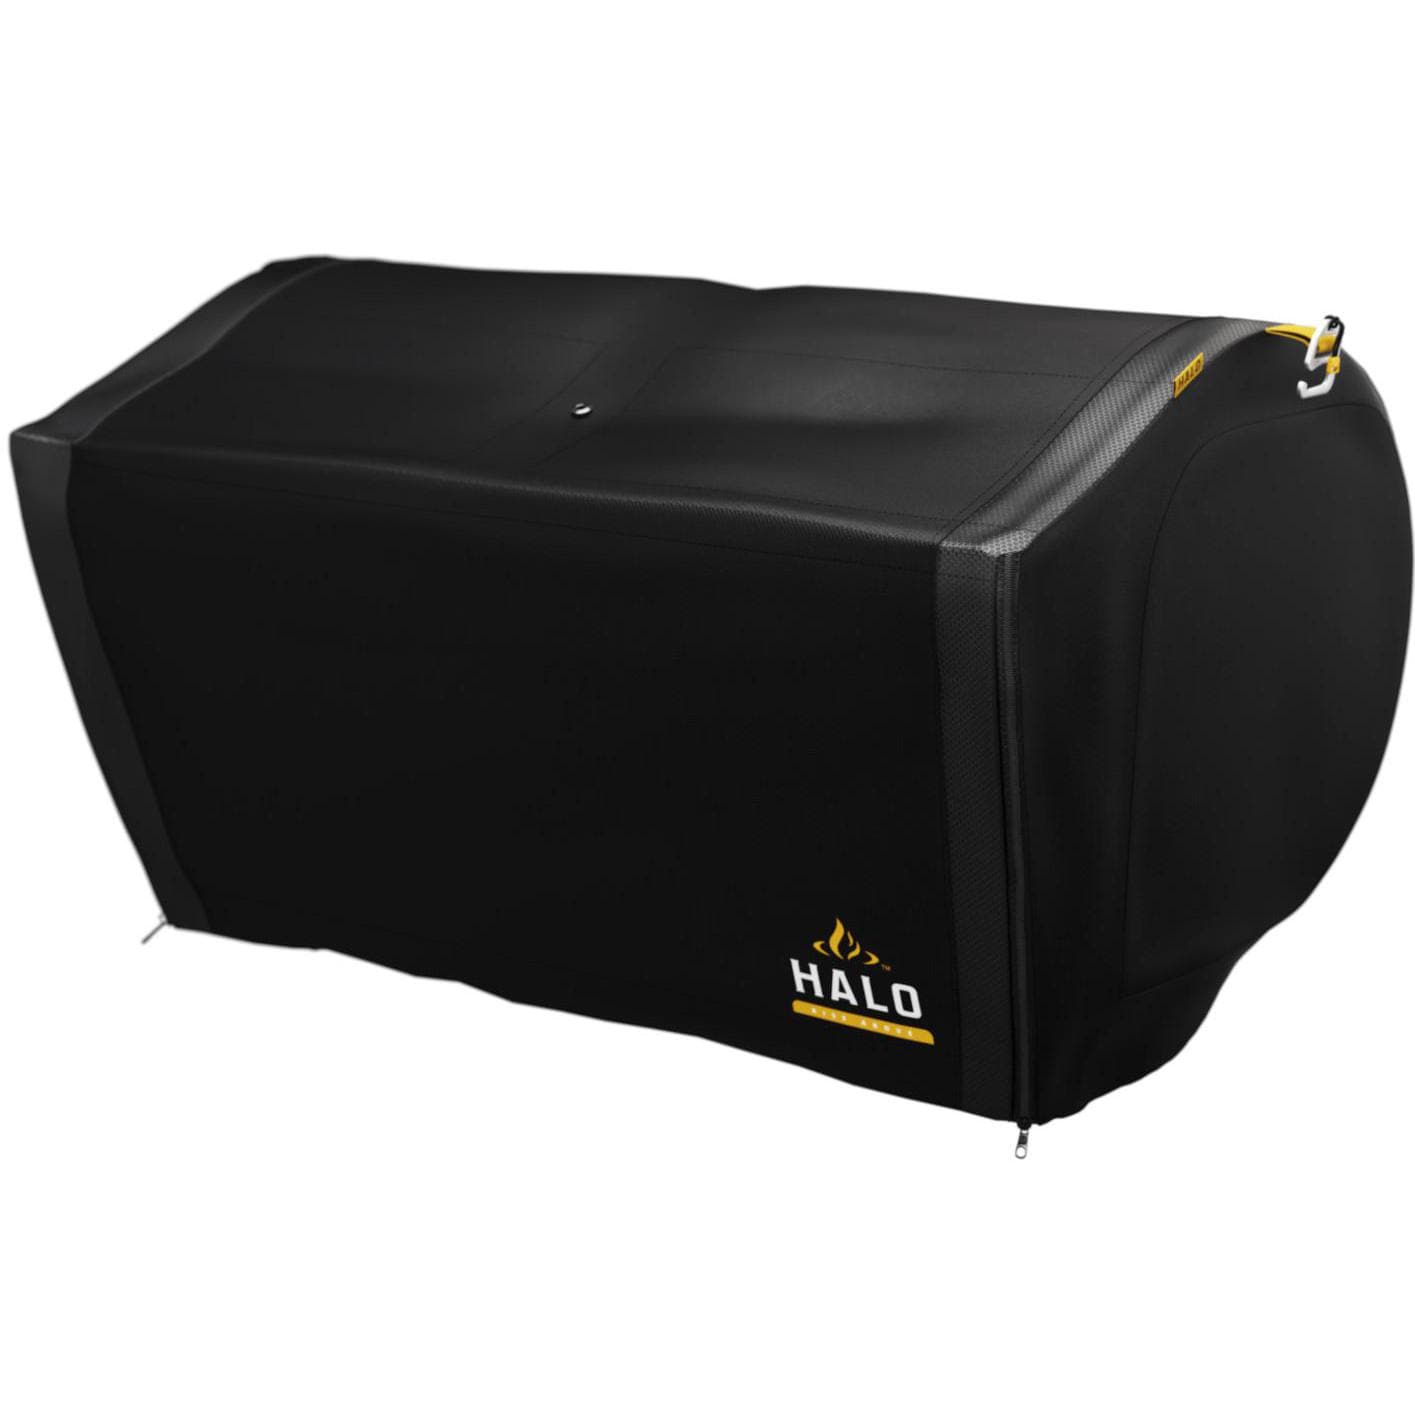 HALO Prime300 Pellet Grill Cover - HS-5005